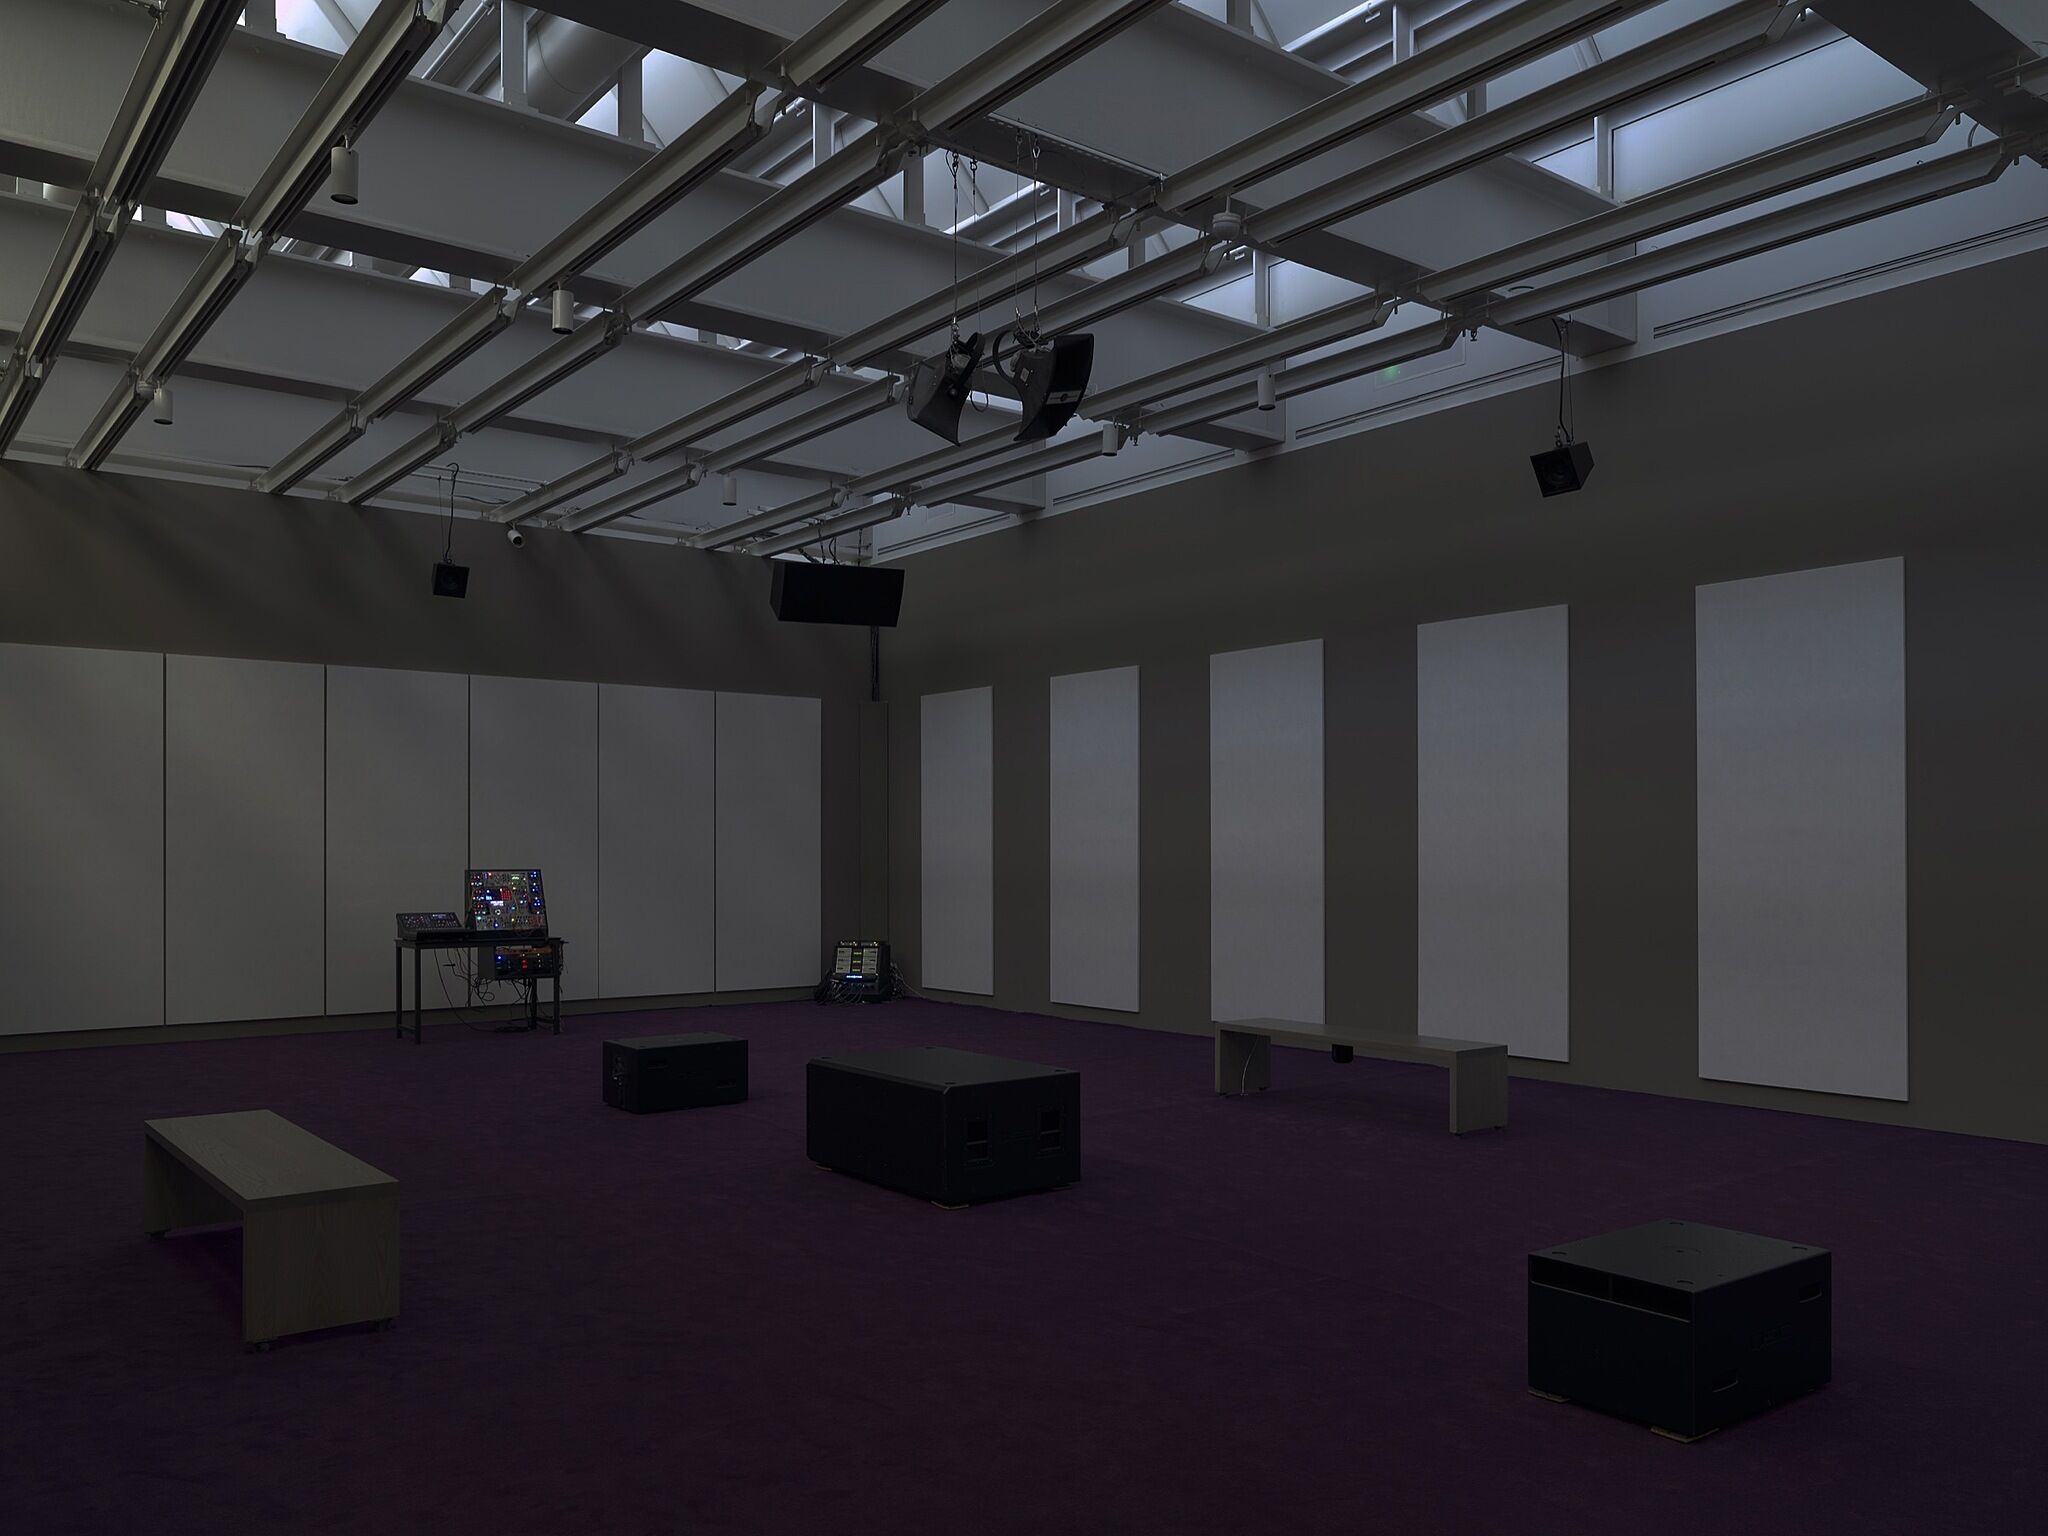 A dimly lit gallery space with speakers.